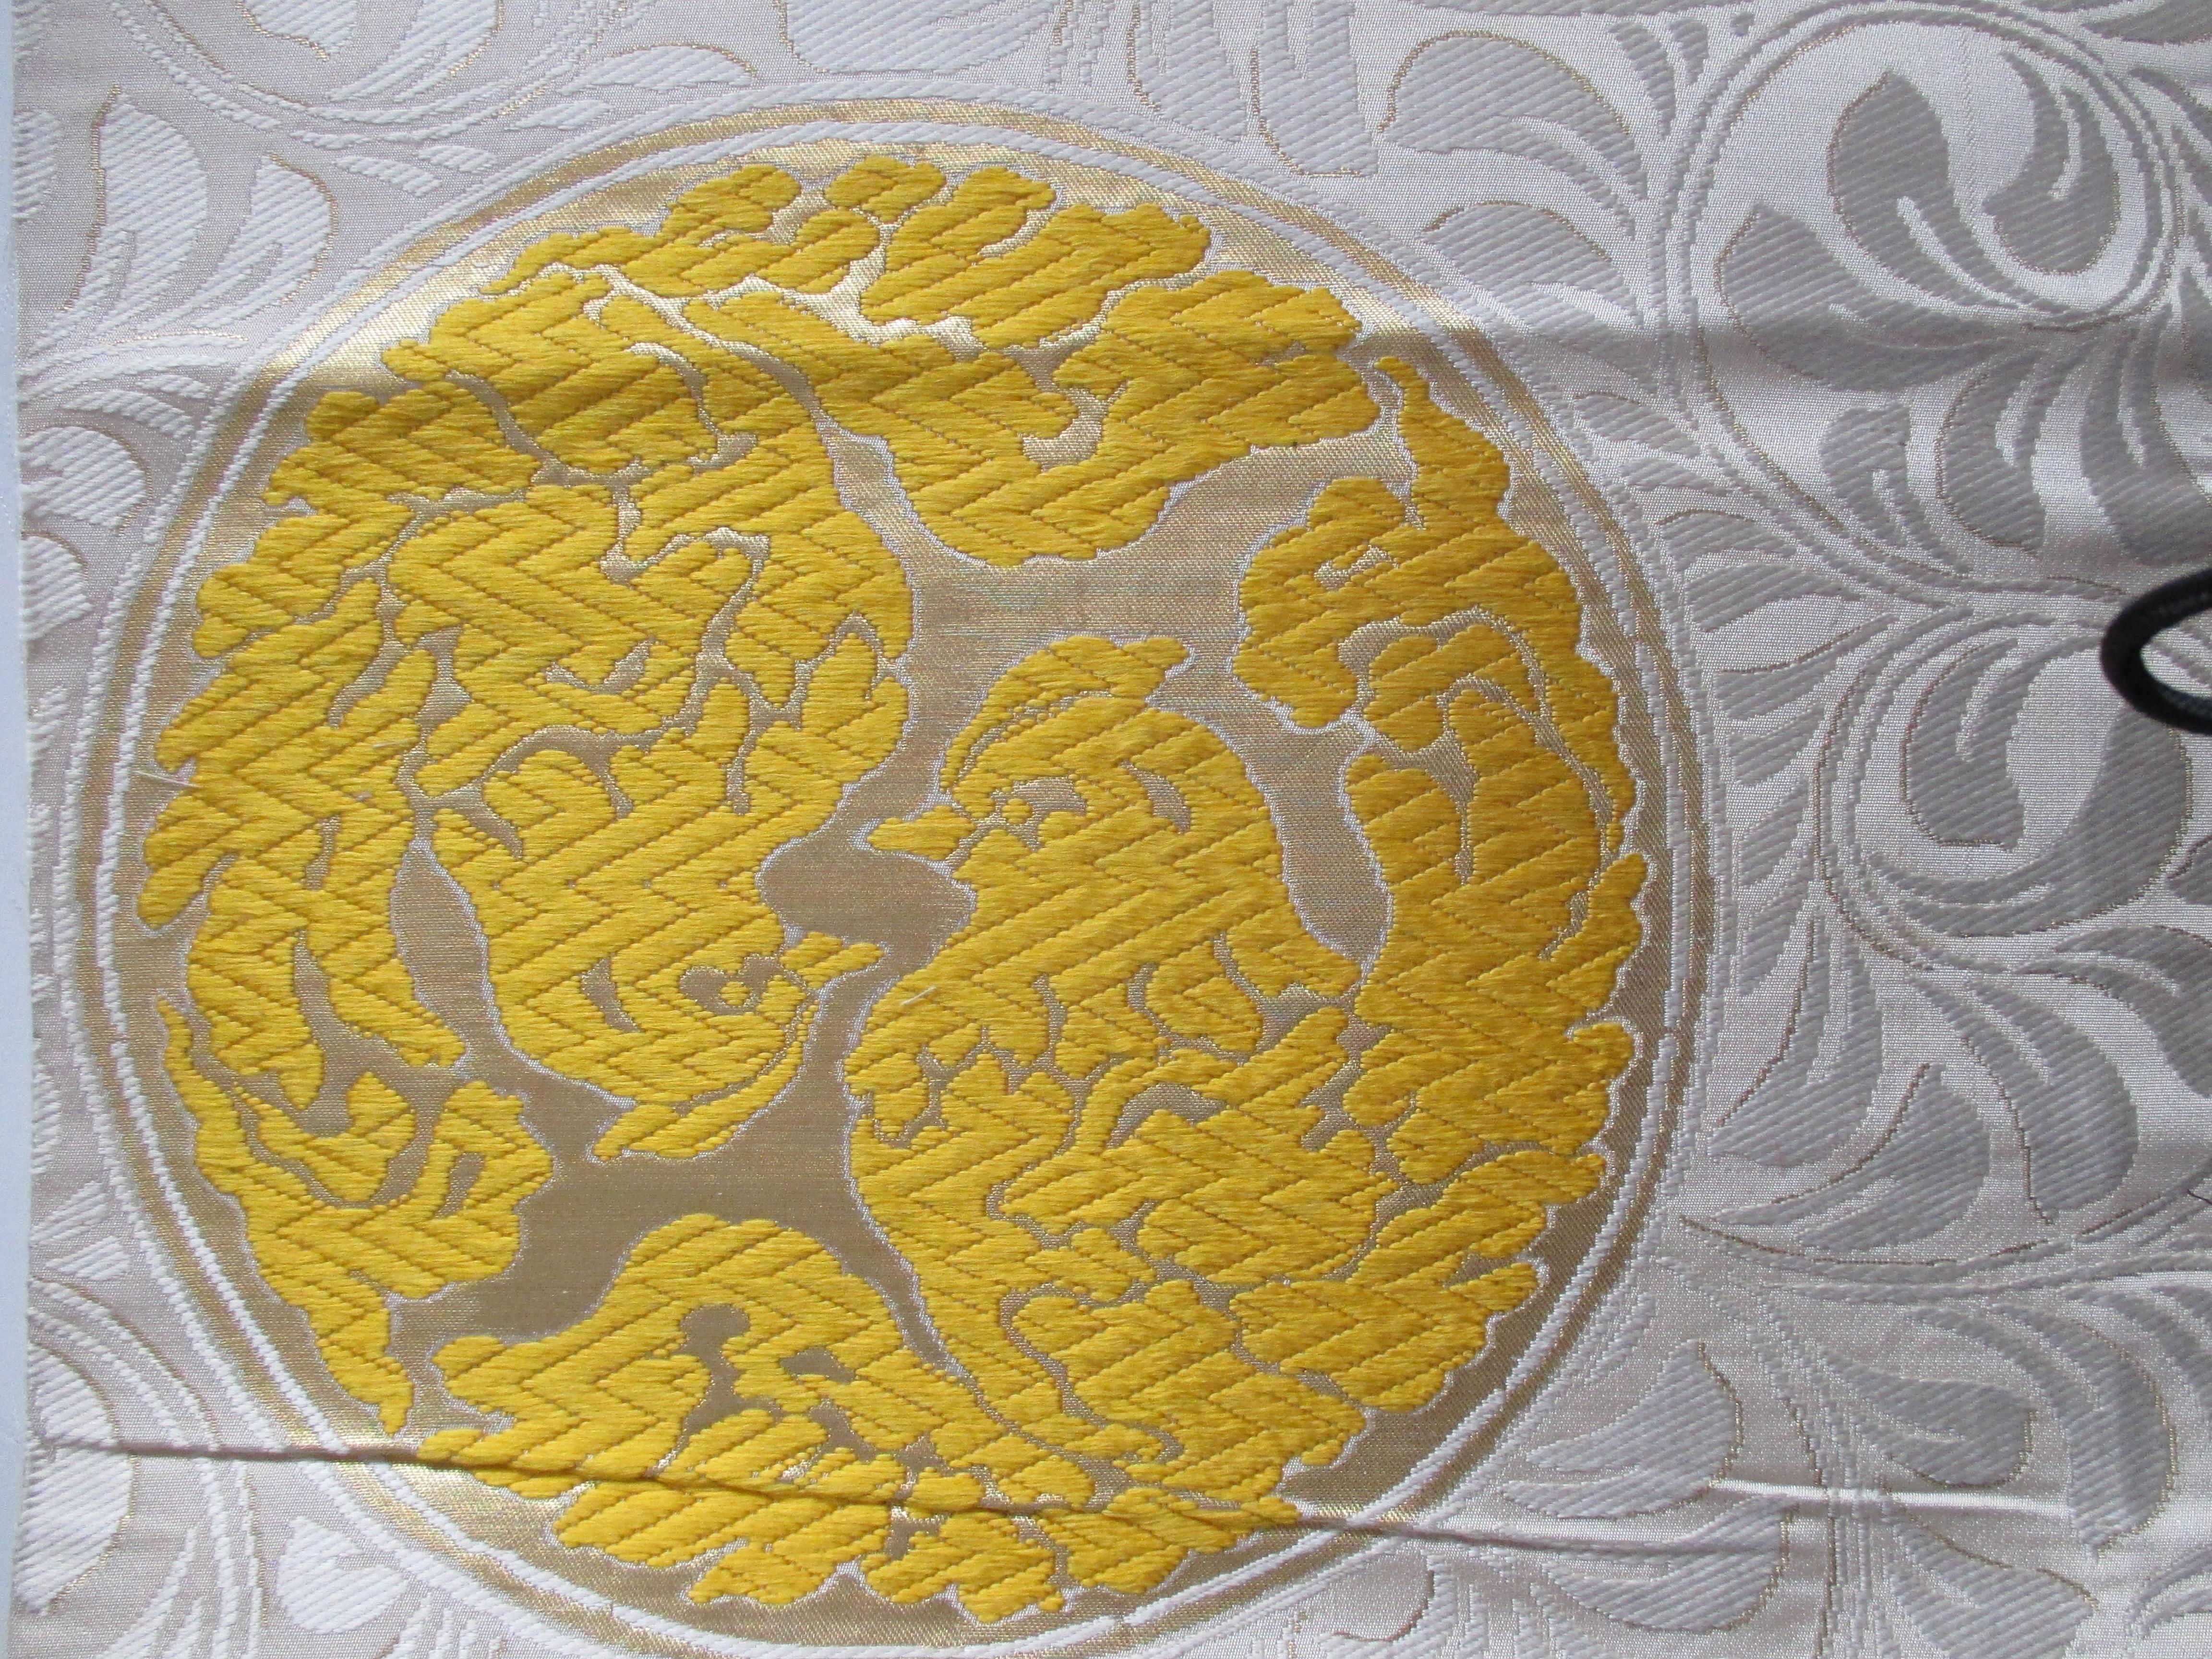 Vintage yellow and green silk obi textile with medallions fragment.
Tone and tone woven floral with embroidered birds and metallic threads.
Ideal for a lumbar pillow.
Fragment panel size is 20.5